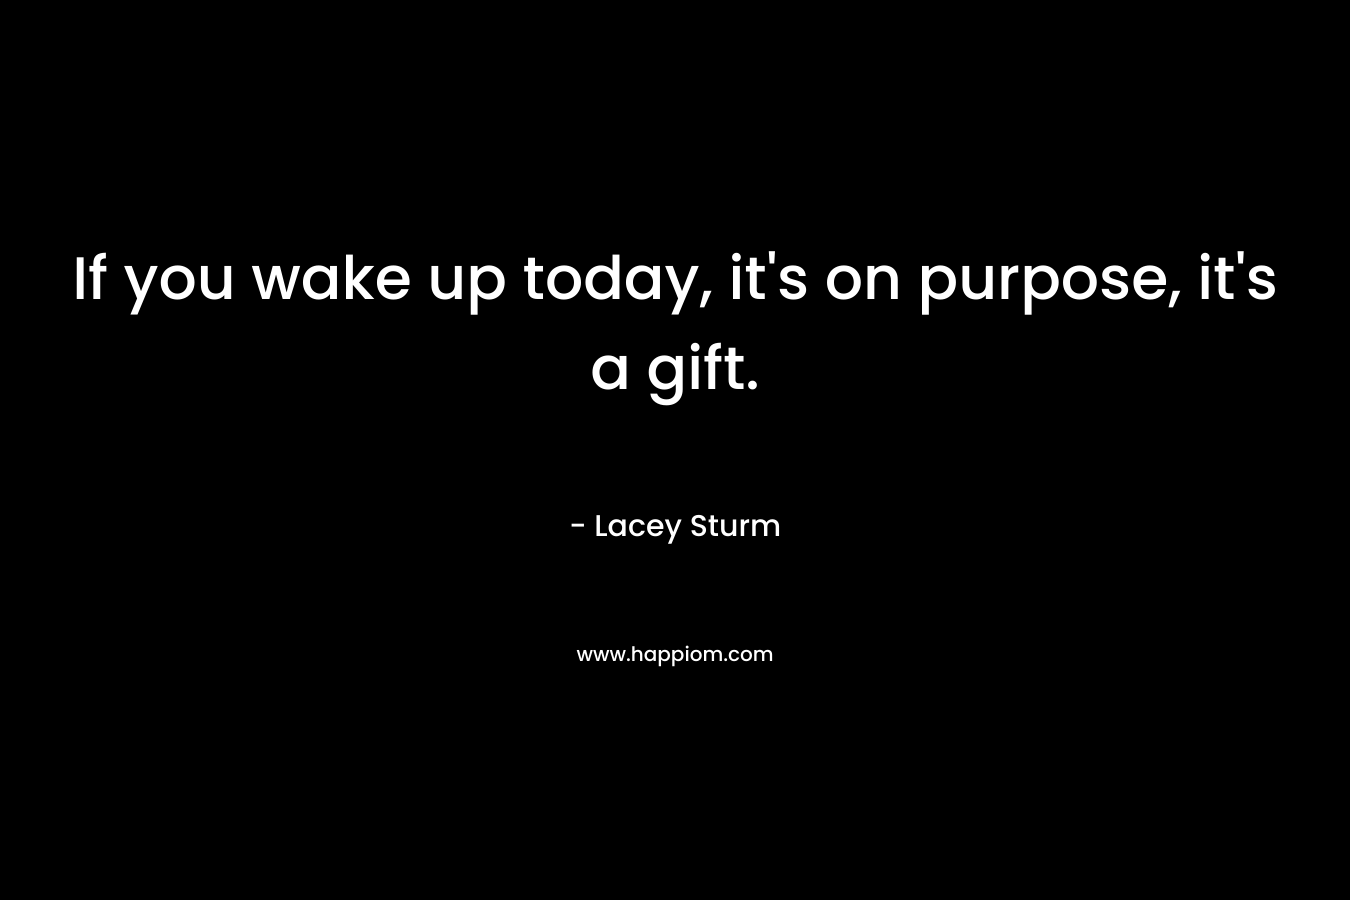 If you wake up today, it's on purpose, it's a gift.